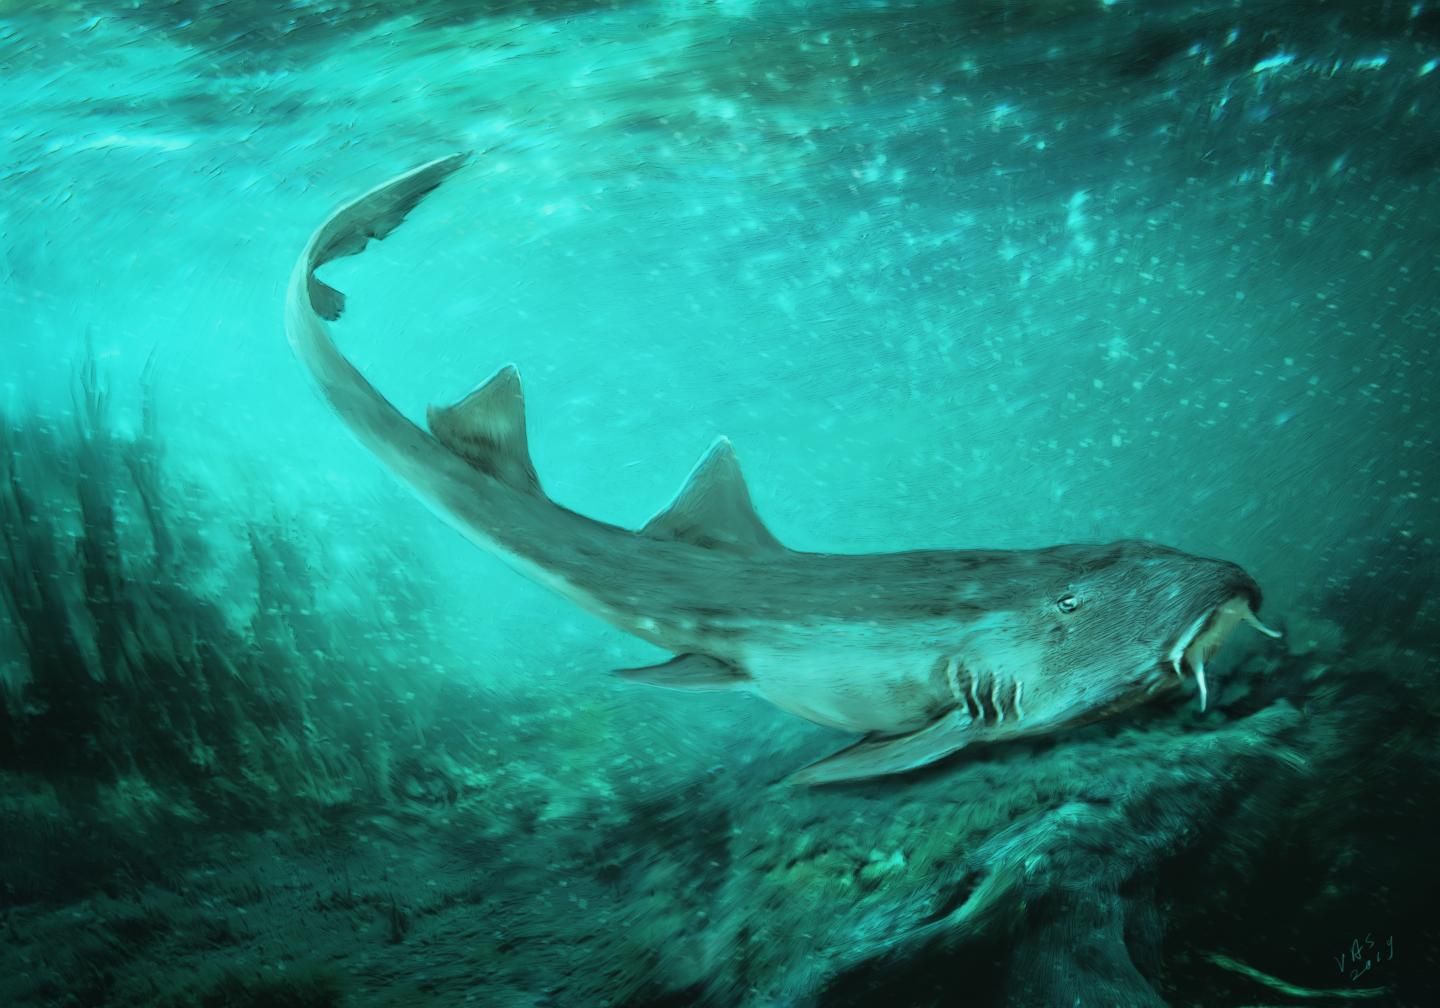 New Prehistoric Shark Species Discovered Alongside Sue the T. Rex | Science| Smithsonian Magazine